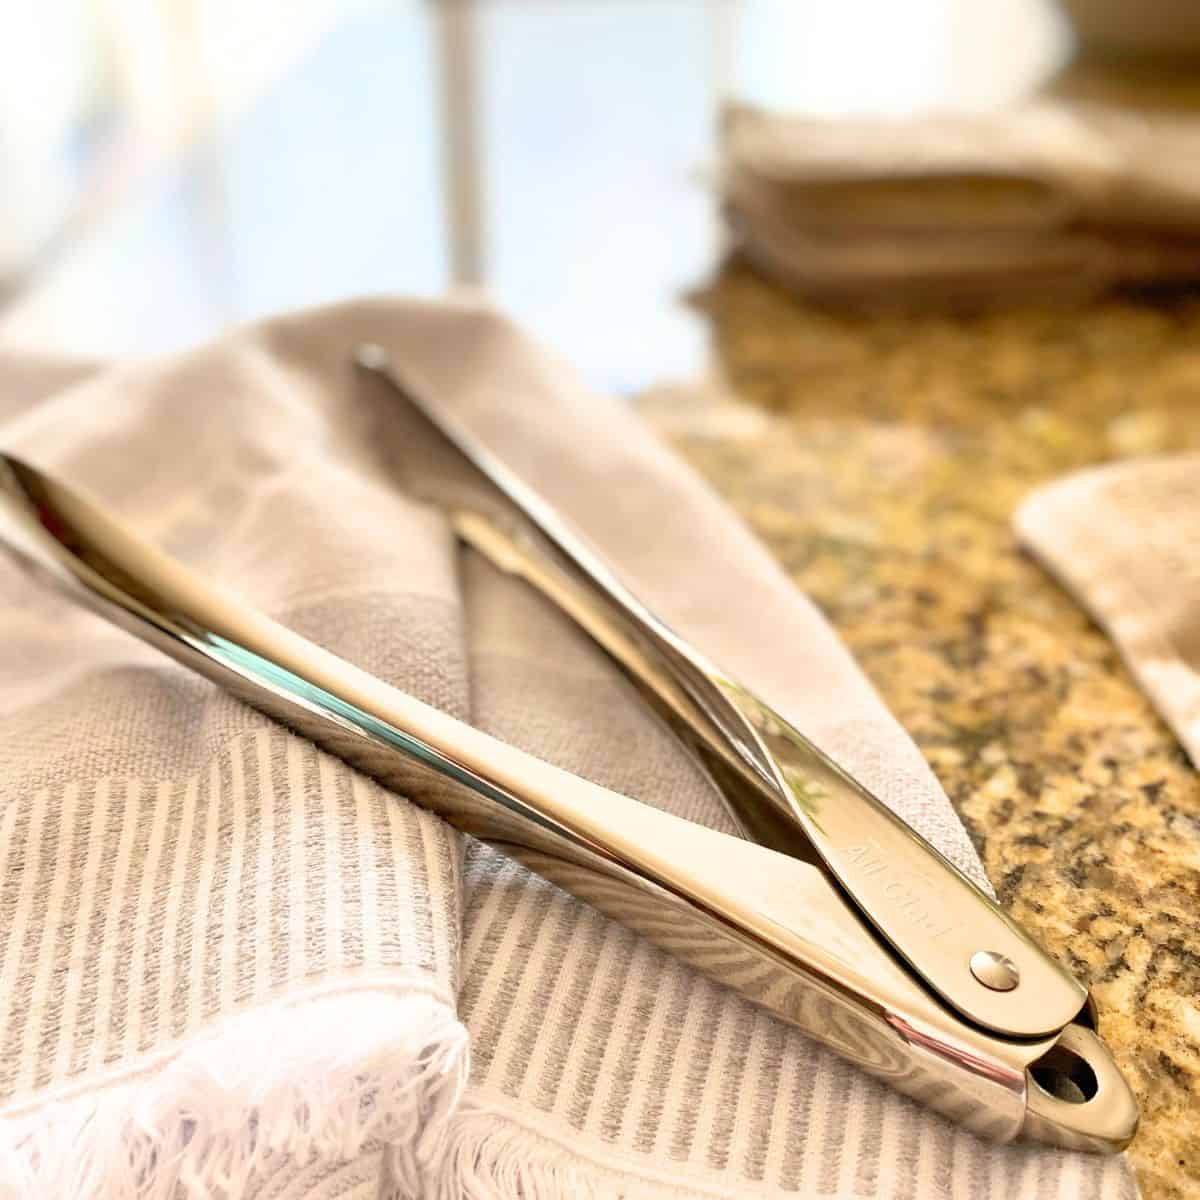 Stainless steel kitchen serving tongs on a kitchen counter